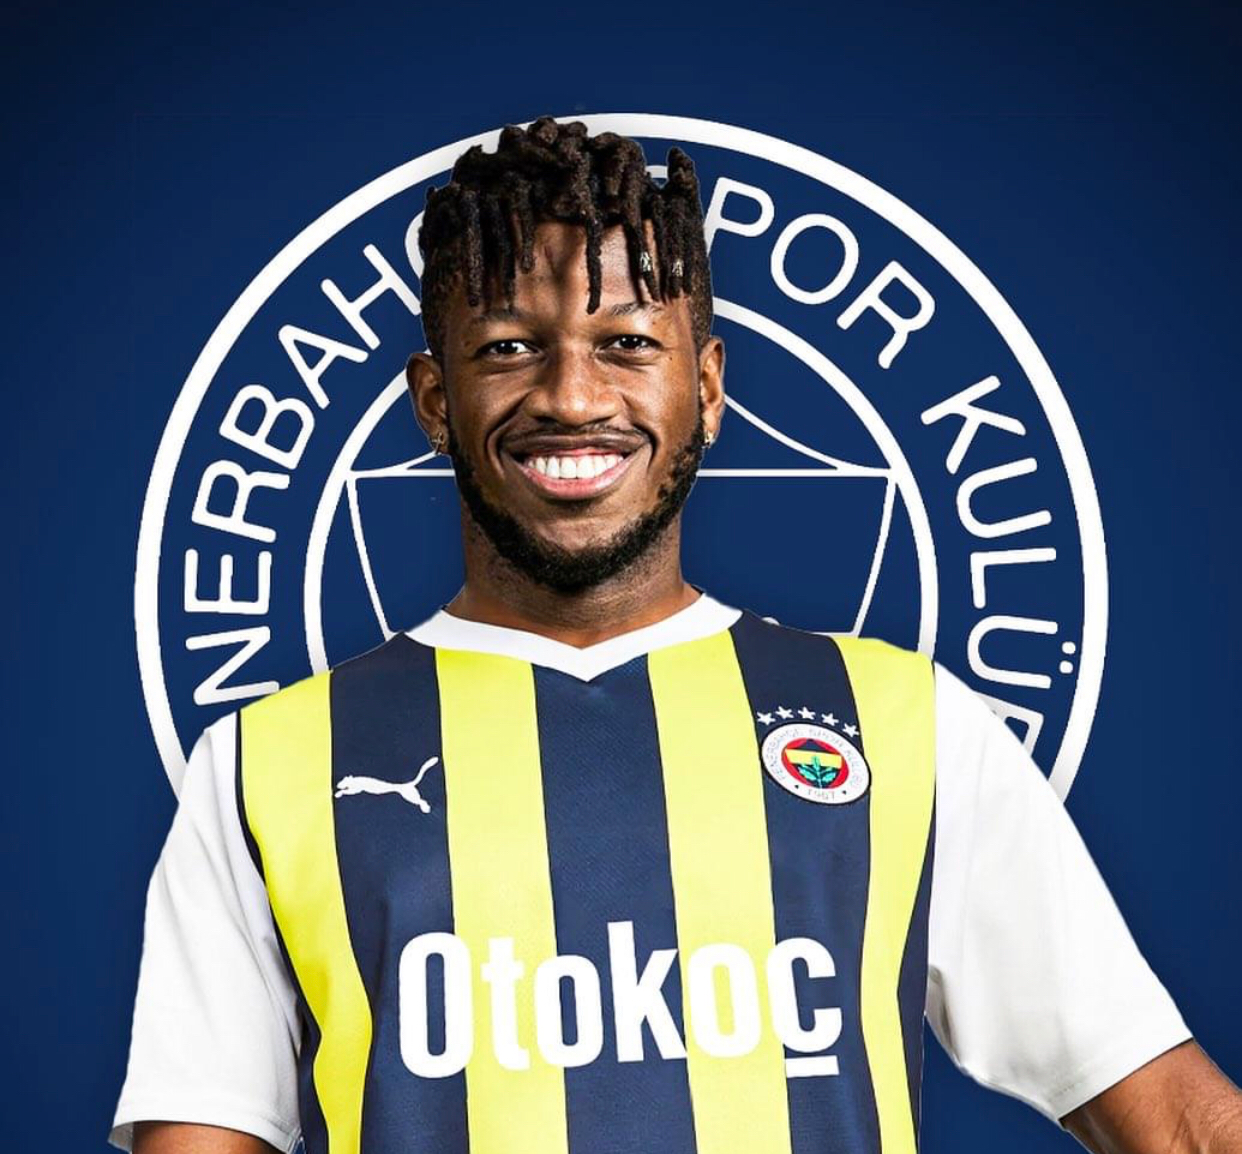 Manchester United Accept Bid from Fenerbahce for Midfielder FredManchester United have accepted a £12.9 million bid from Turkish giants Fenerbahce for Brazilian midfielder Fred